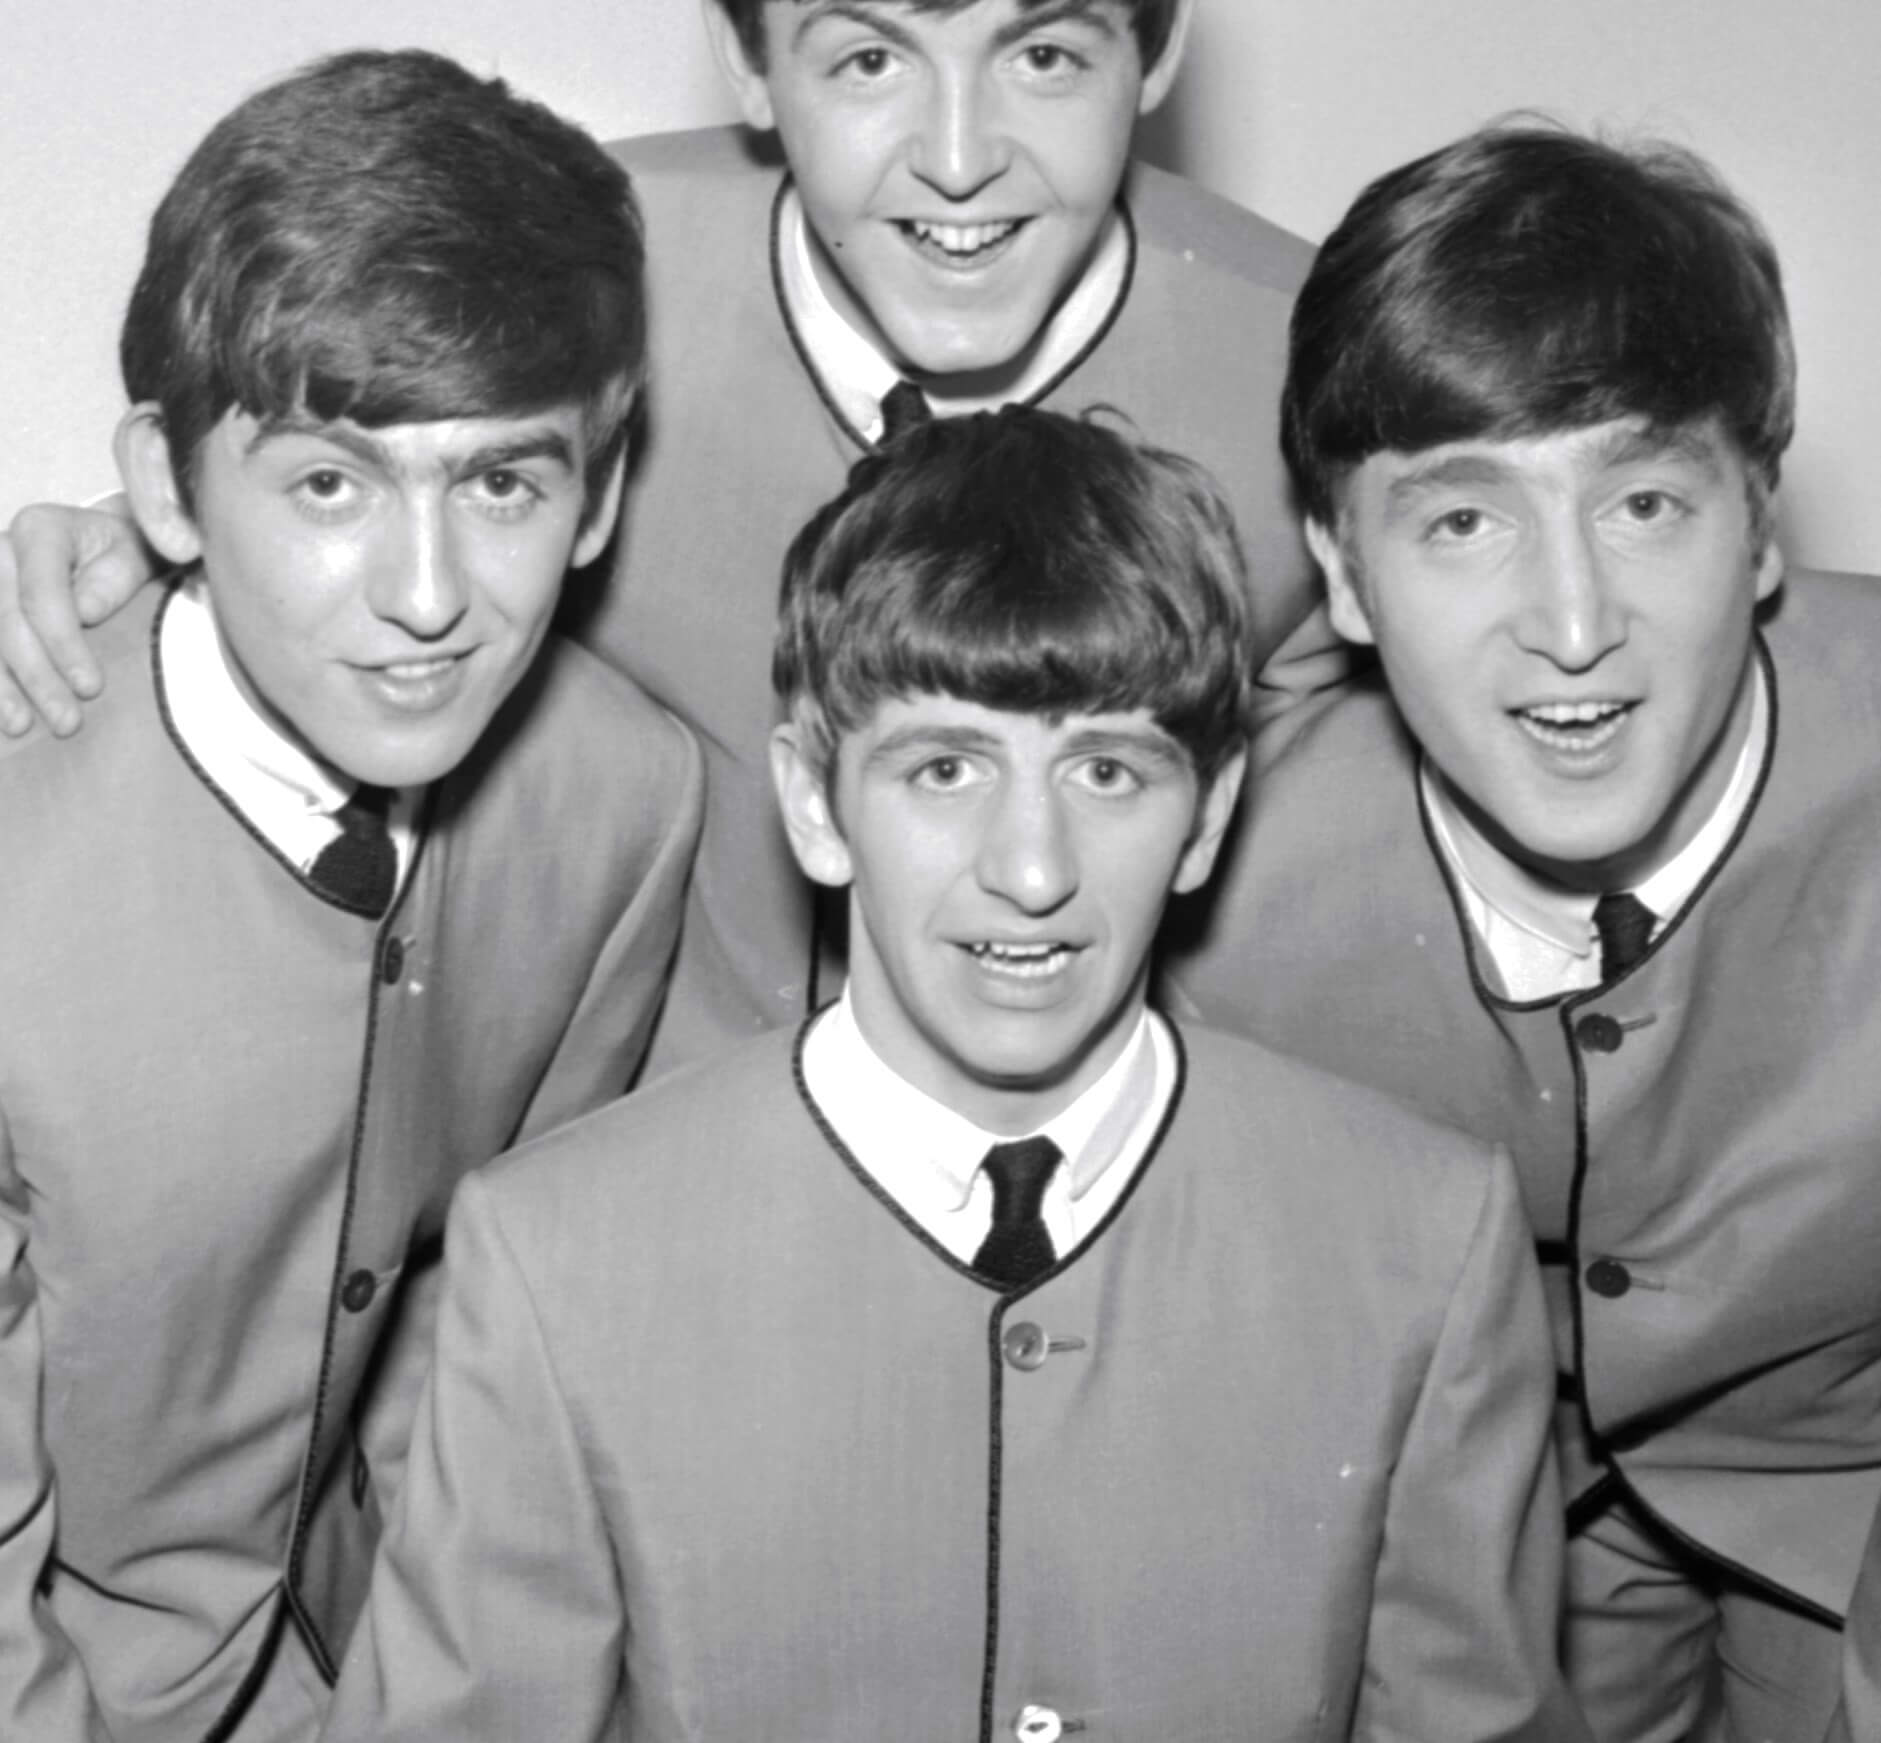 The Beatles dressed identically during the "I'm Down" era